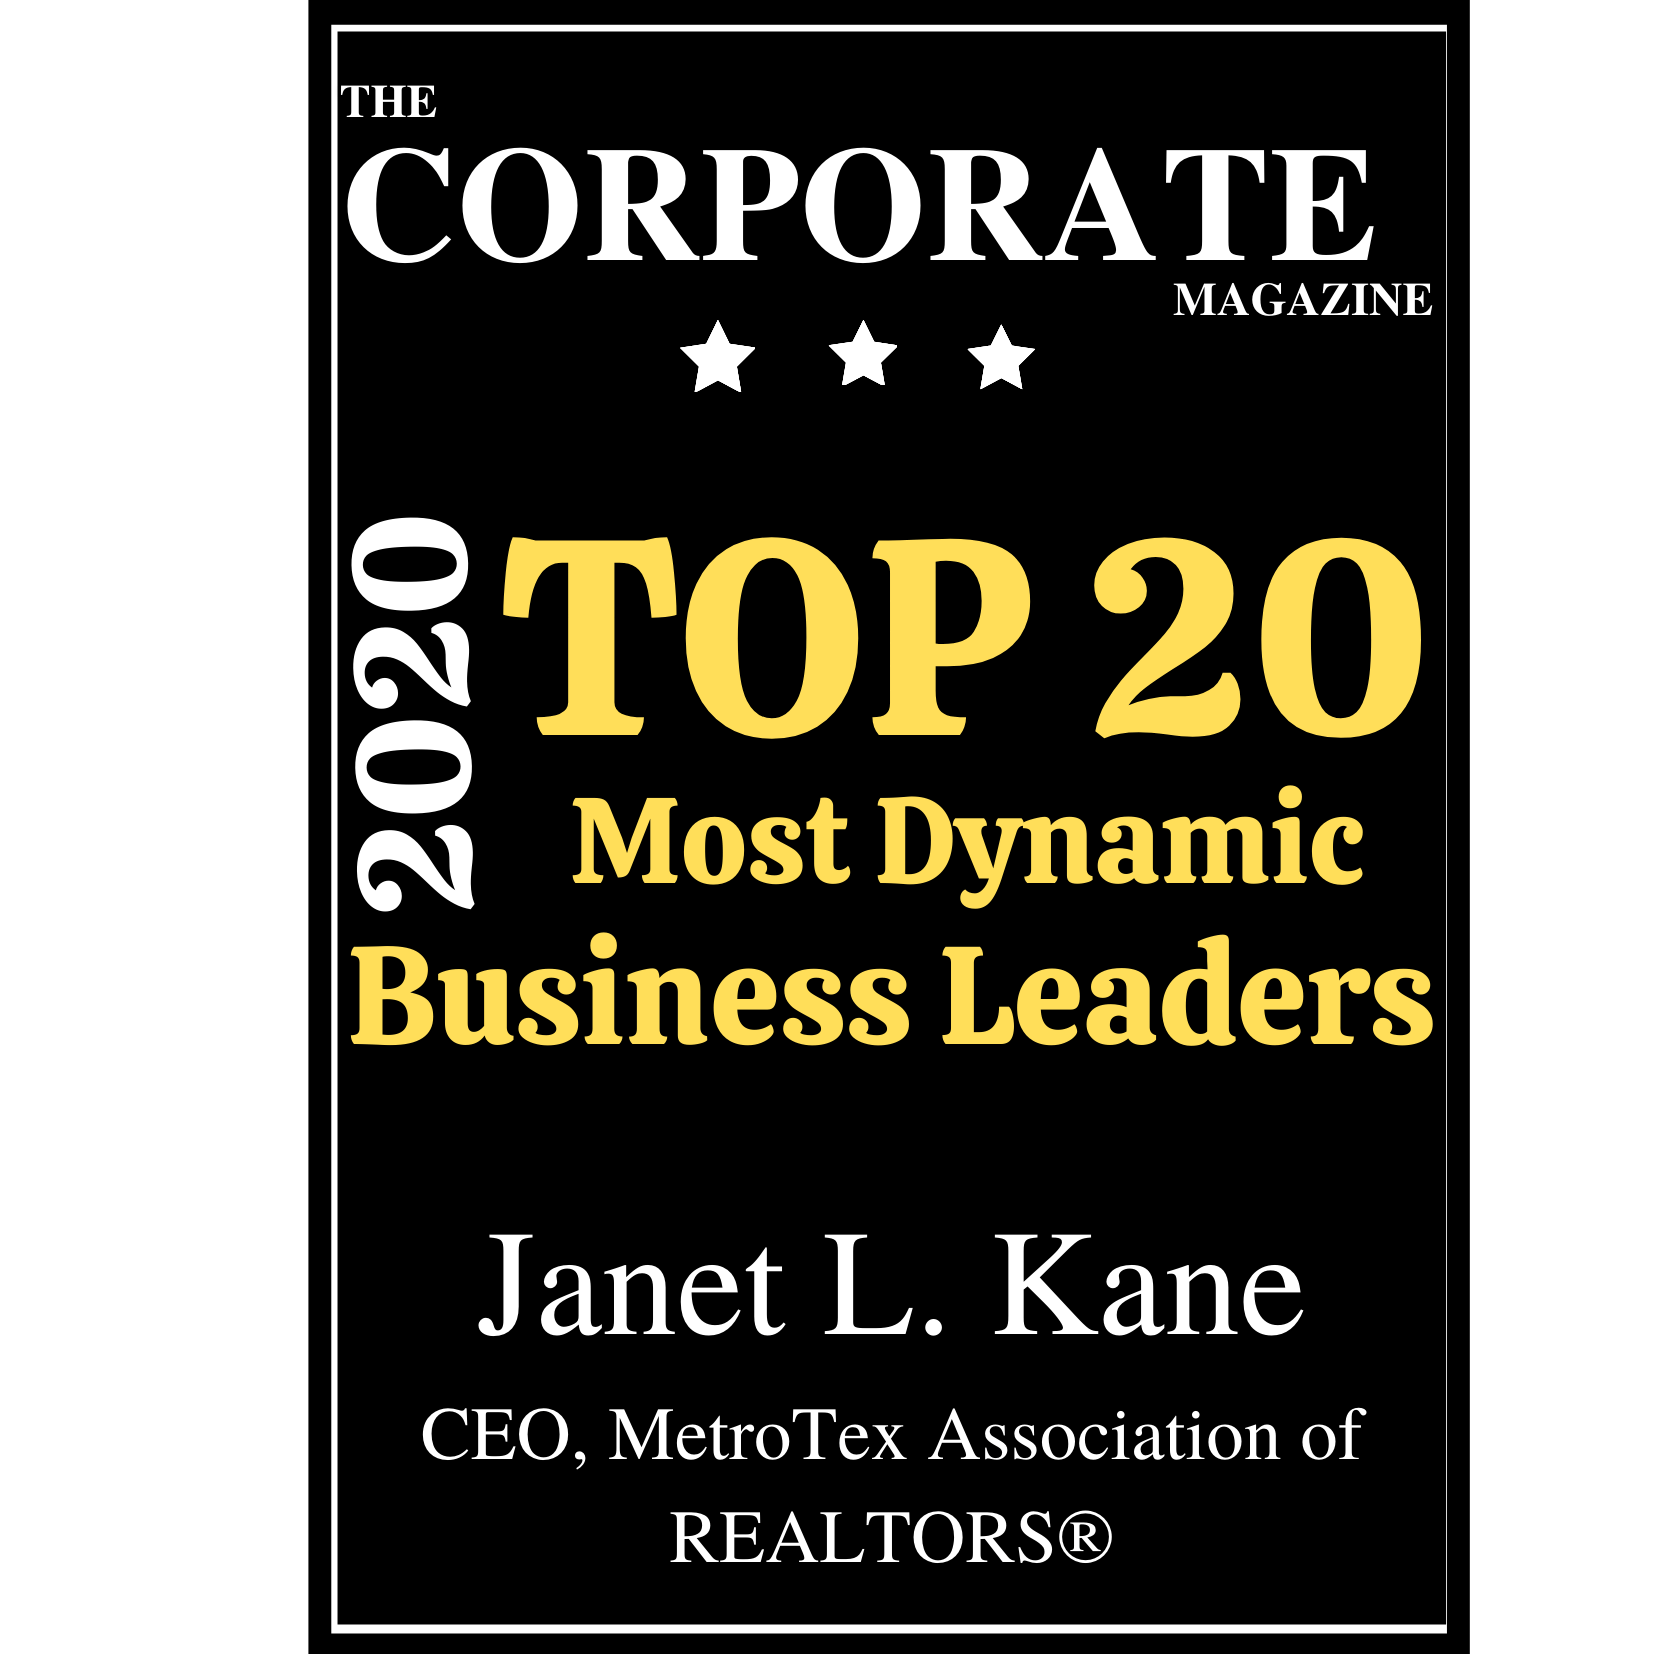 janet-kane-Top-Business-and-women-leaders